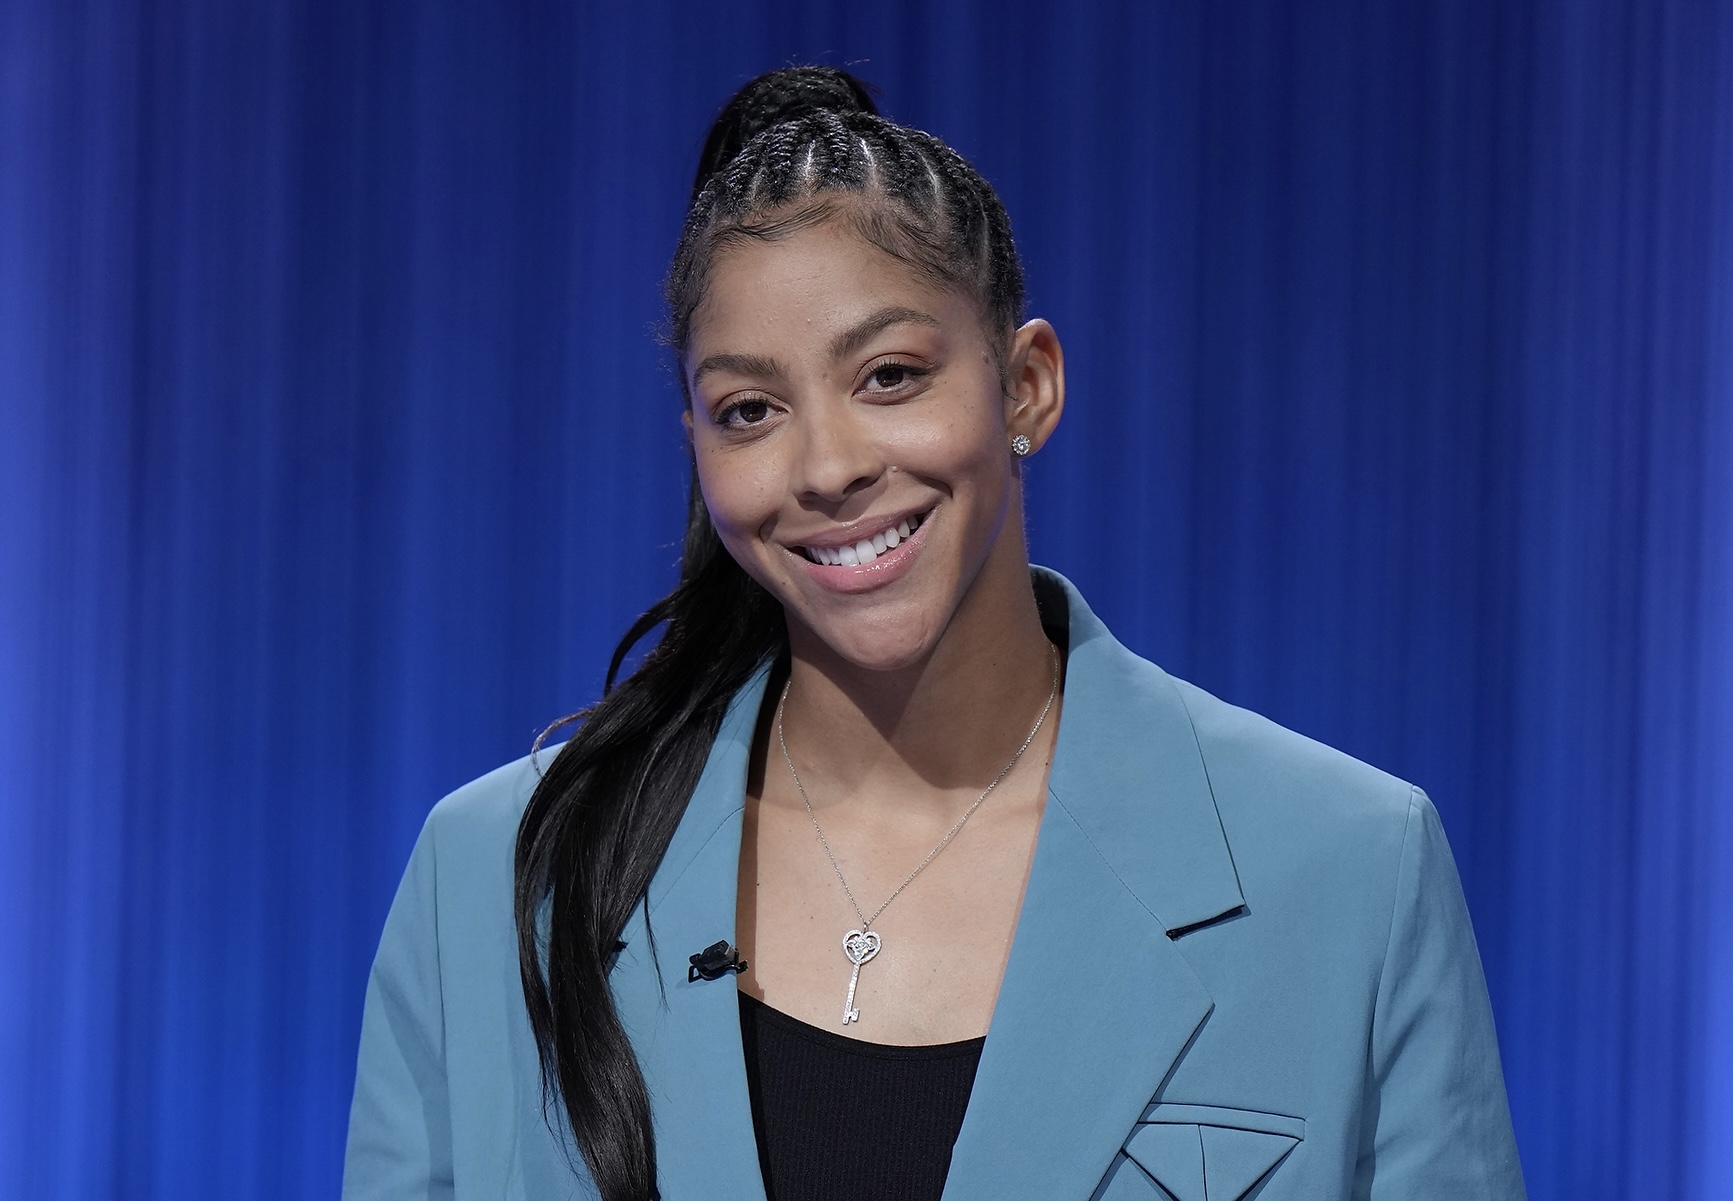 Candace Parker Wants To Return To WNBA But Only If Her Foot Heals Completely: ‘I Can’t Play In Pain’